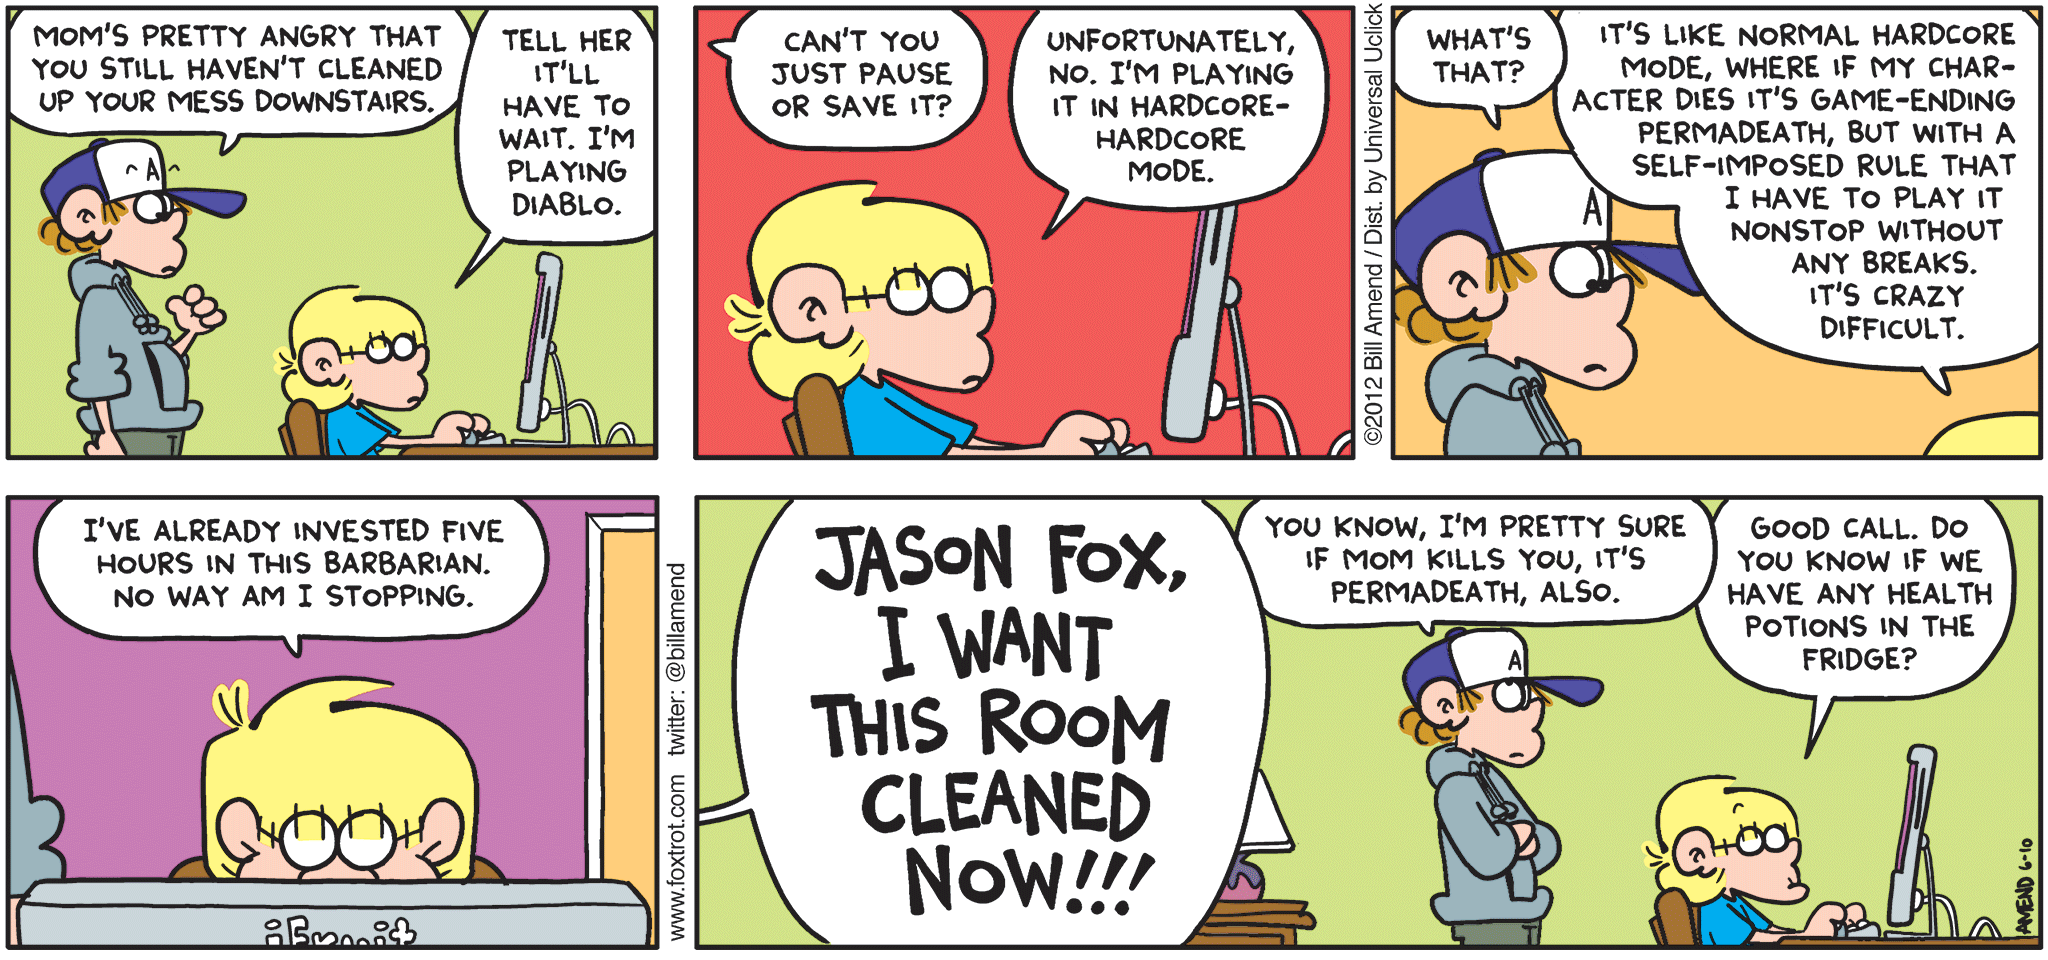 FoxTrot comic strip by Bill Amend - "Permadeath" published June 10, 2012 - Peter: Mom's pretty angry that you still haven't cleaned up your mess downstairs? Jason: Tell her it'll have to wait. I'm playing Diablo. Peter: Can't you just pause or save it? Jason: Unfortunately, no. I'm playing it in hardcore-hardcore mode. Peter: What's that? Jason: It's like normal hardcore mode, where if my character dies it's game-ending permadeath, but with a self-imposed rule that I have to play it nonstop without any breaks. It's crazy difficult. I've already invested five hours in this barbarian. No way am I stopping Andy: JASON FOX, I WANT THIS ROOM CLEANED NOW!!! Peter: You know, I'm pretty sure if mom kills you, it's permadeath, also. Jason: Good call, do you know if we have any health potions in the fridge?